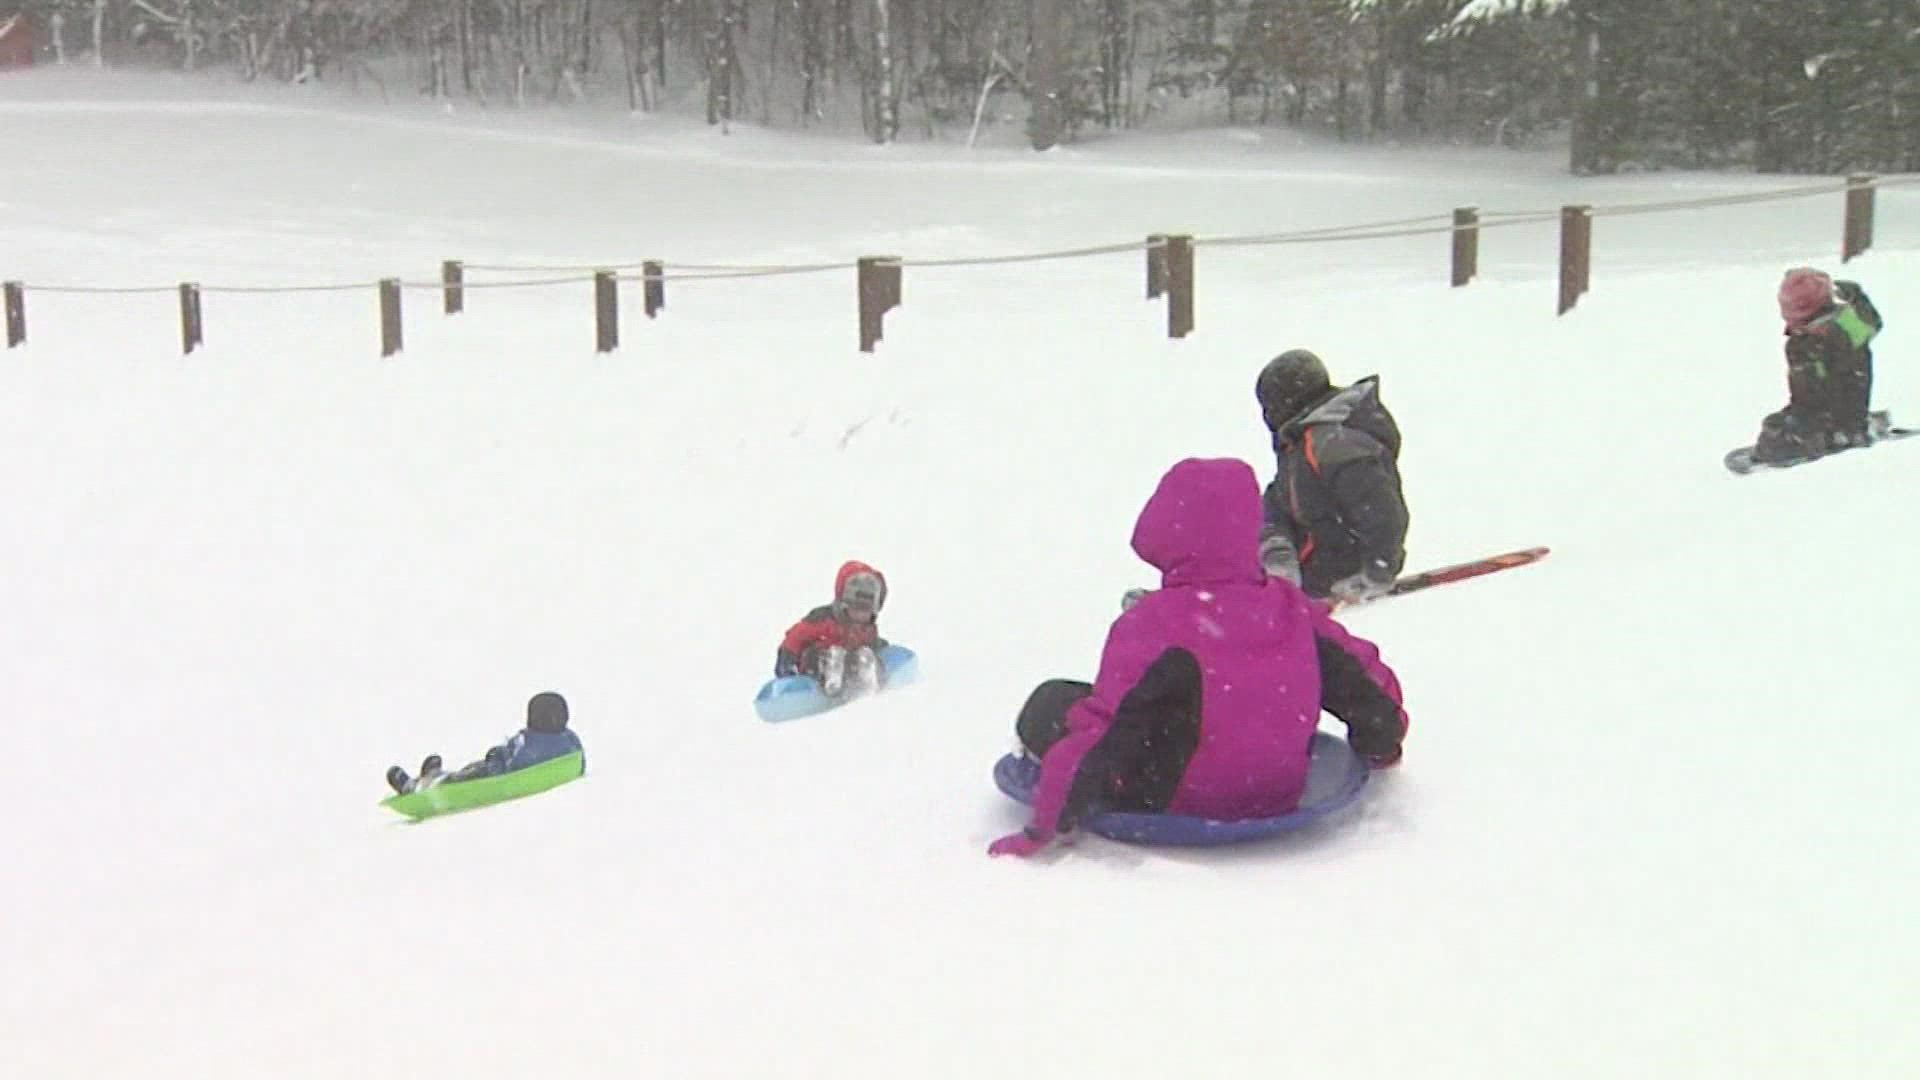 Pigeon Creek Park is located in West Olive, and is known as a popular spot in the winter with its groomed sledding hill and cross-country ski tracks.